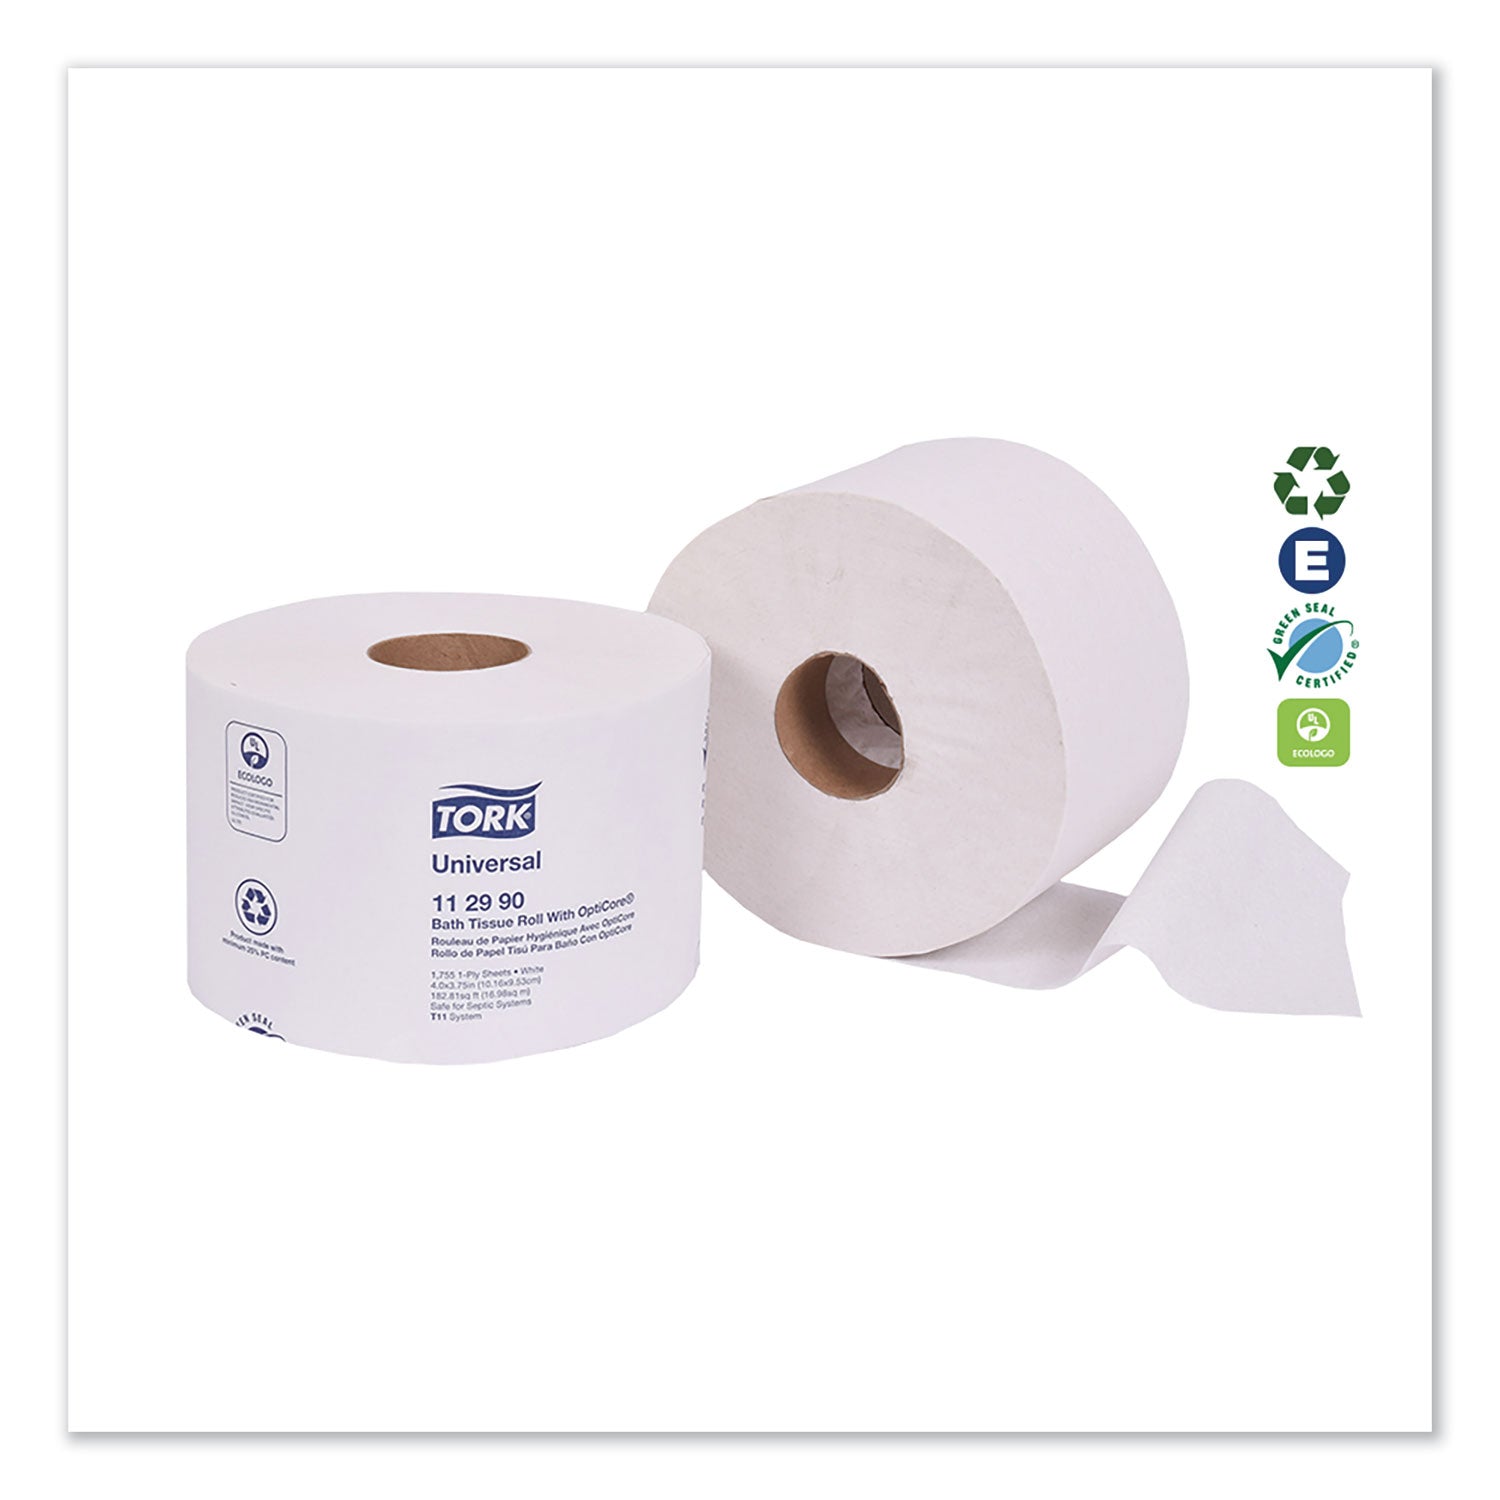 universal-bath-tissue-roll-with-opticore-septic-safe-1-ply-white-1755-sheets-roll-36-carton_trk112990 - 2